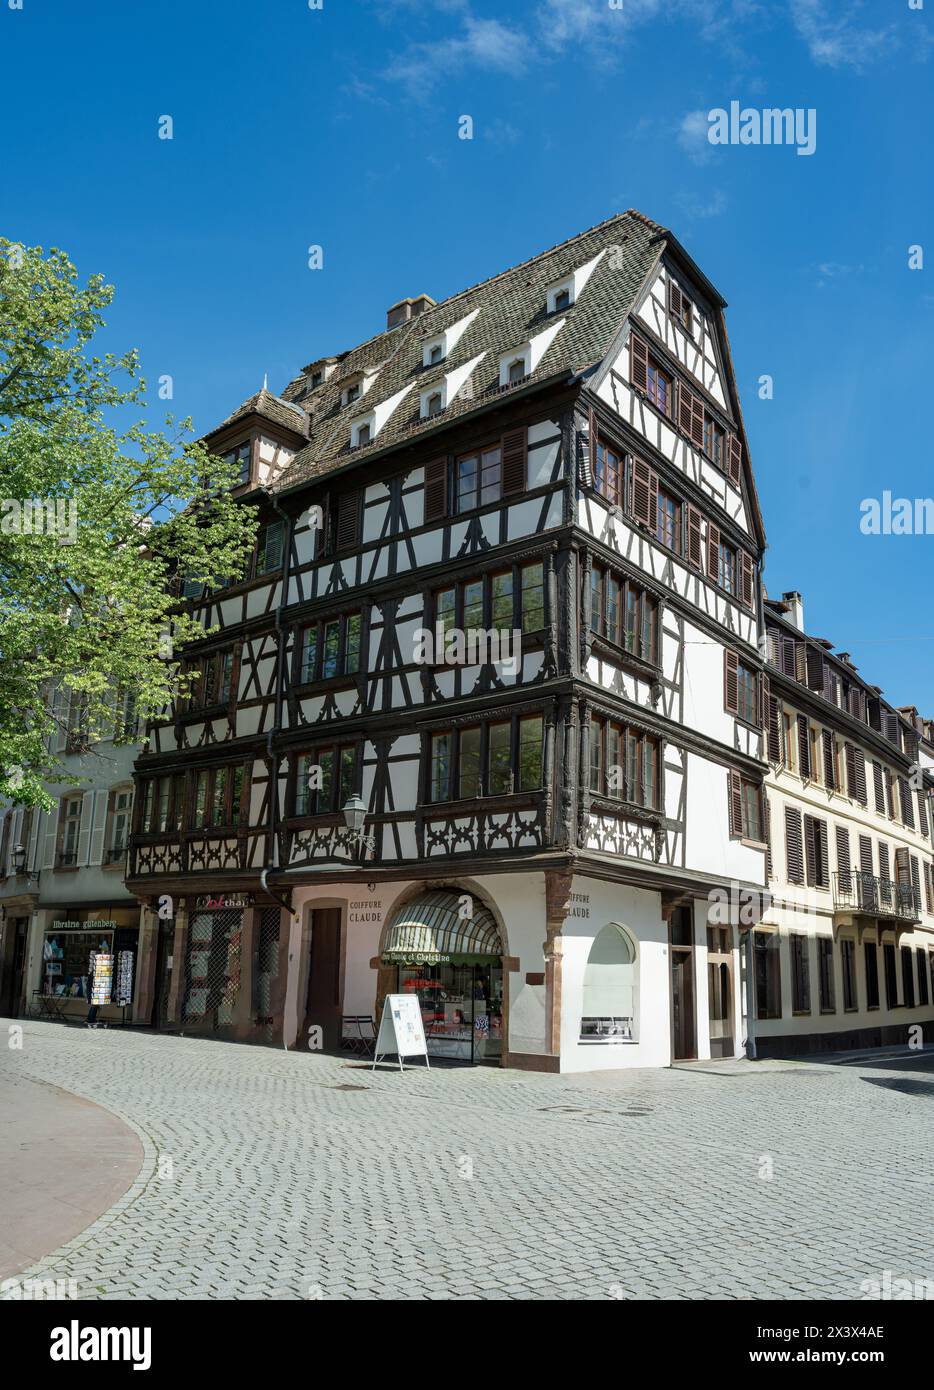 Strasbourg. Place Alexandre Bureau aka ROB. Romantic place to eat and relax. France, Europe Stock Photo